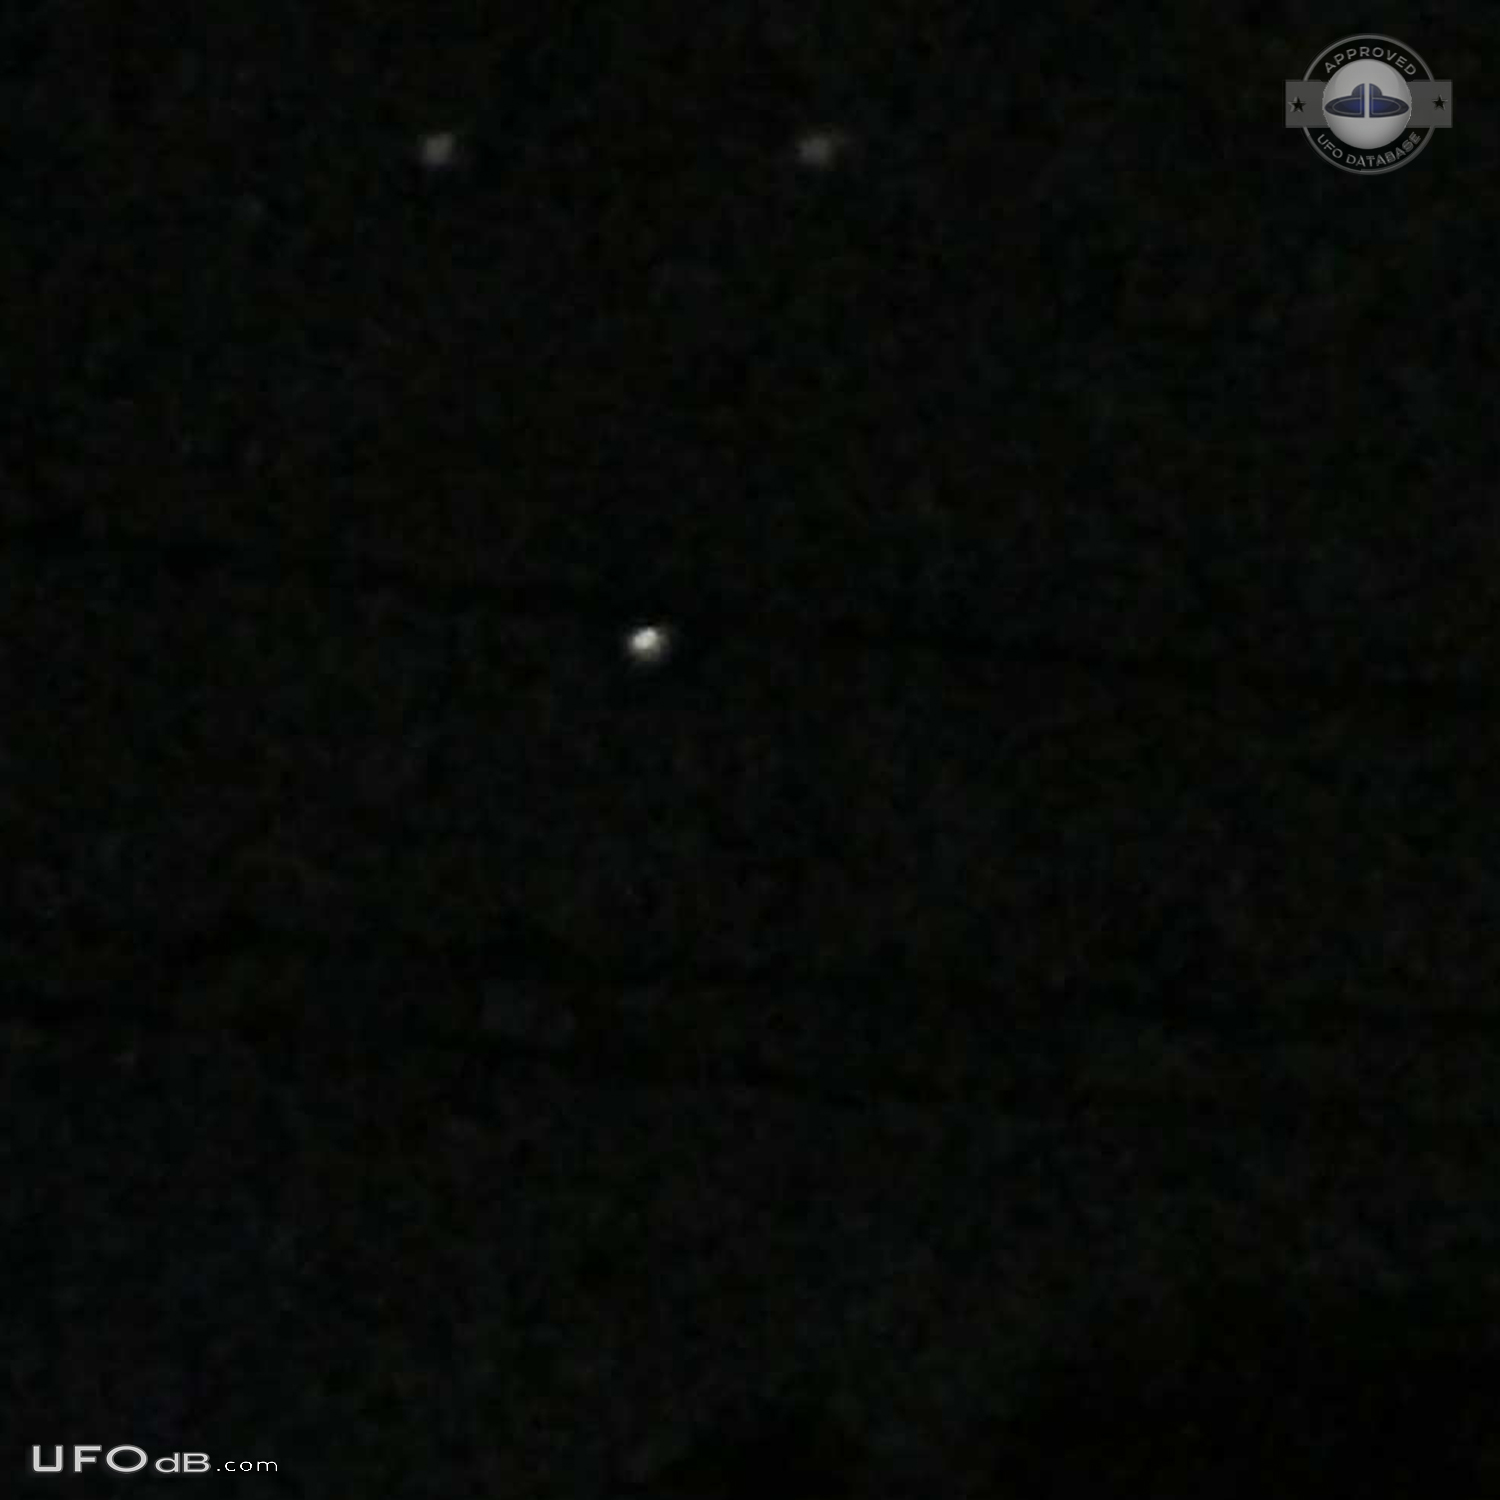 Three slowly moving UFOs in shape of inverted triangle Alabama 2016 UFO Picture #774-6